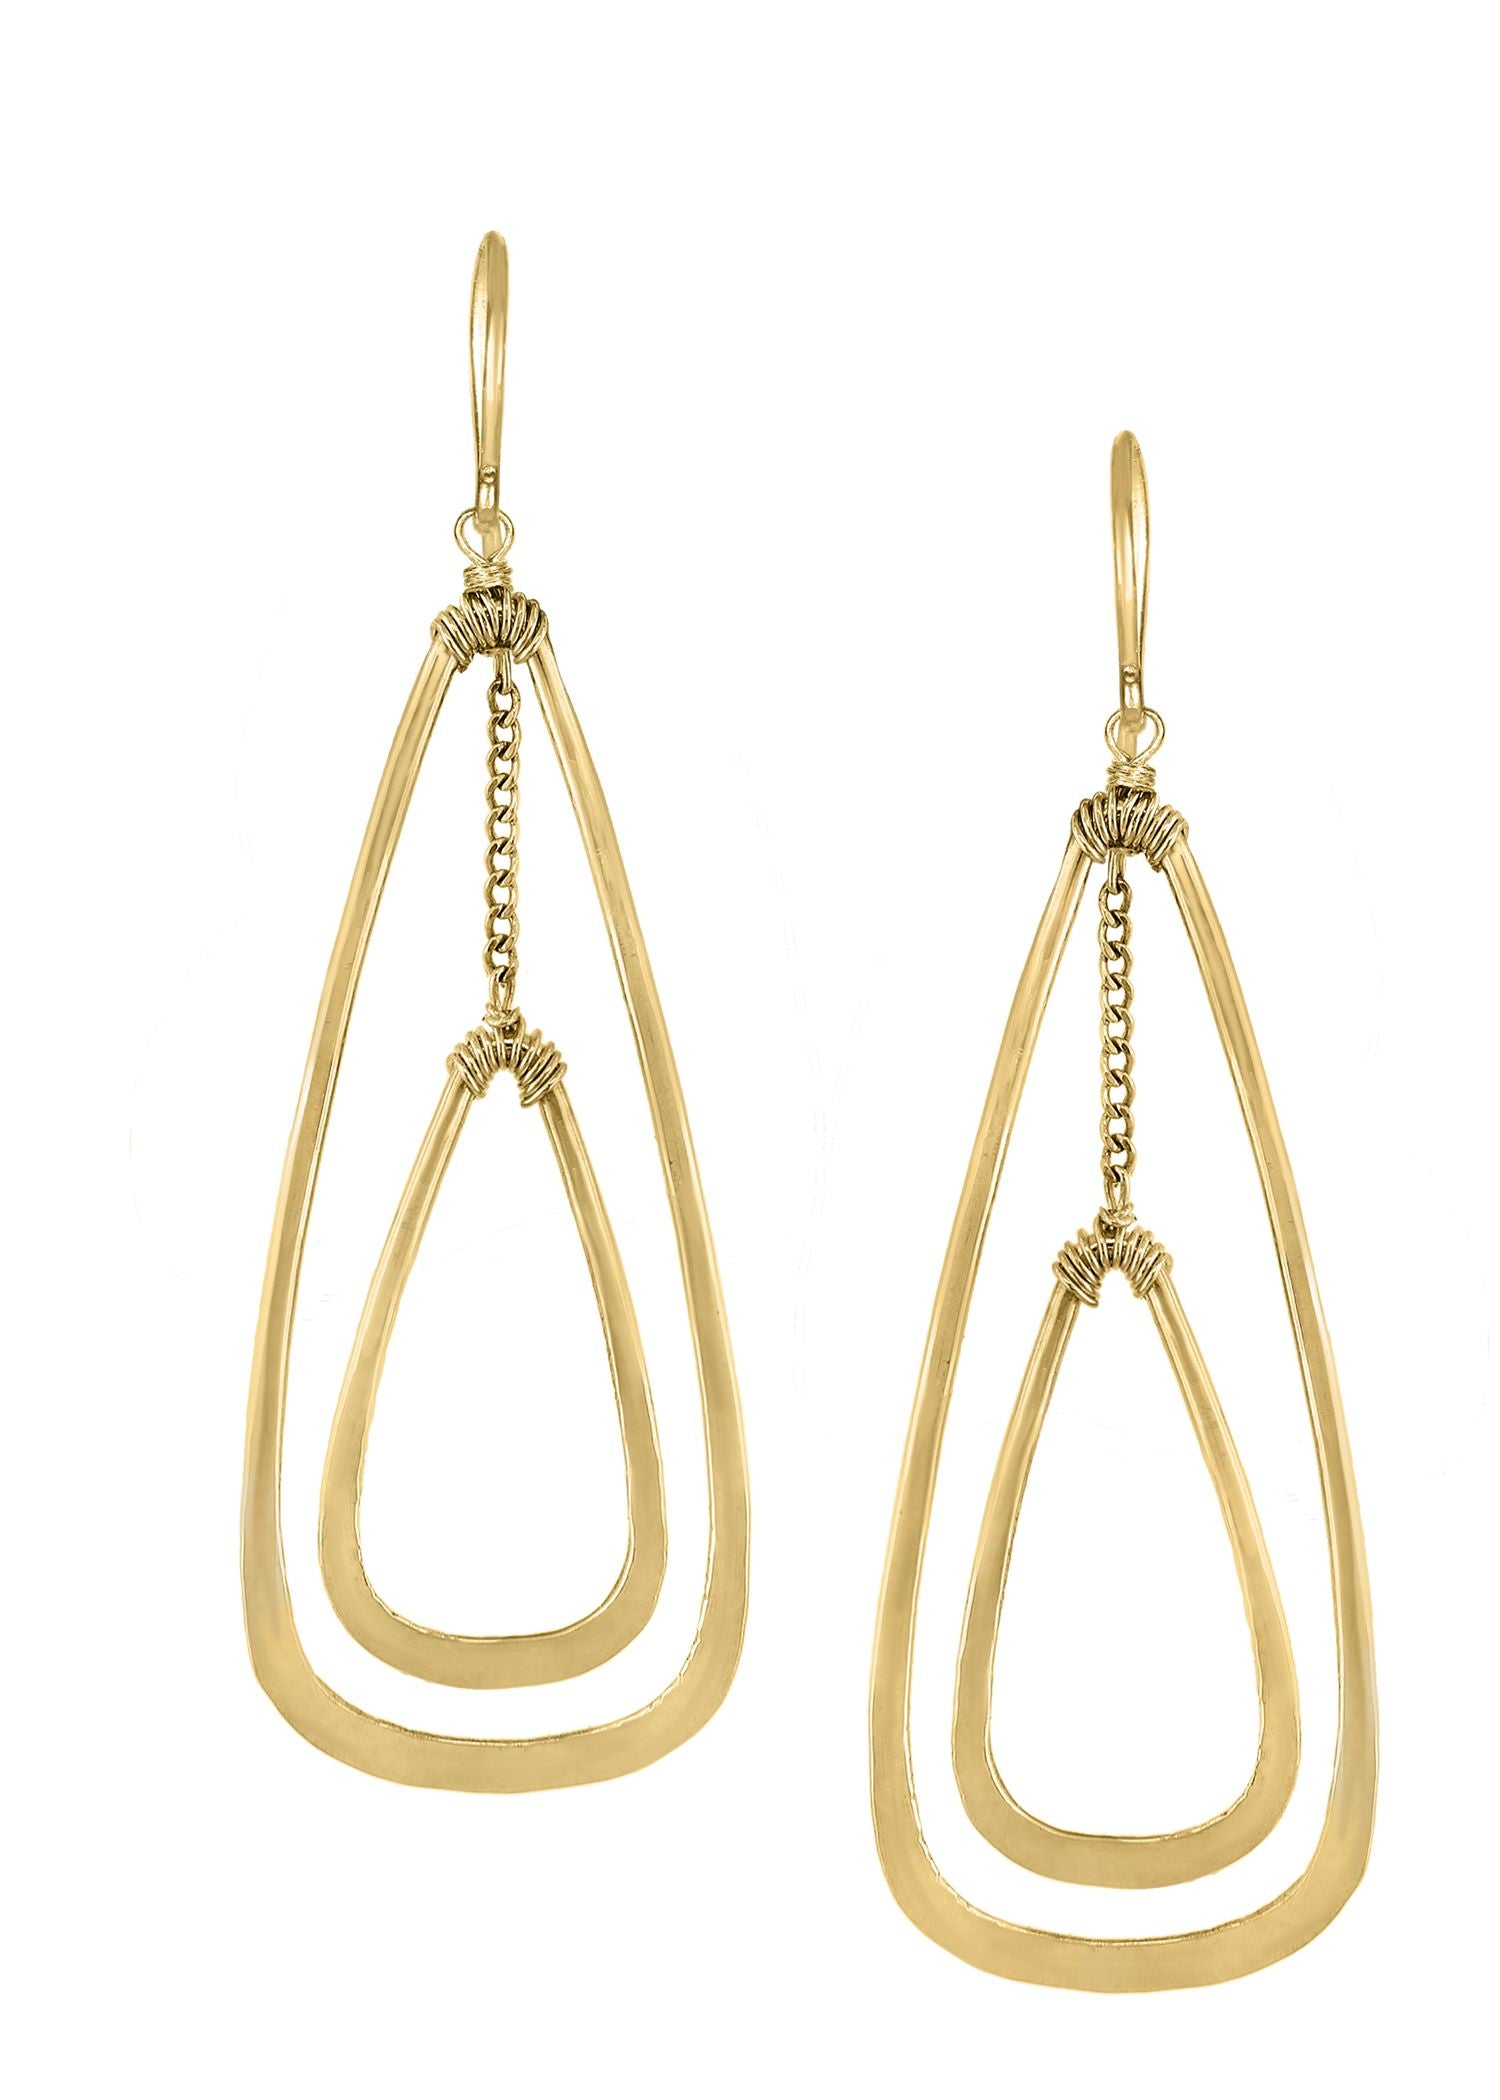 14k gold fill Earrings measure 2-1/4" in length (including the levers) and 5/8" in width Handmade in our Los Angeles studio